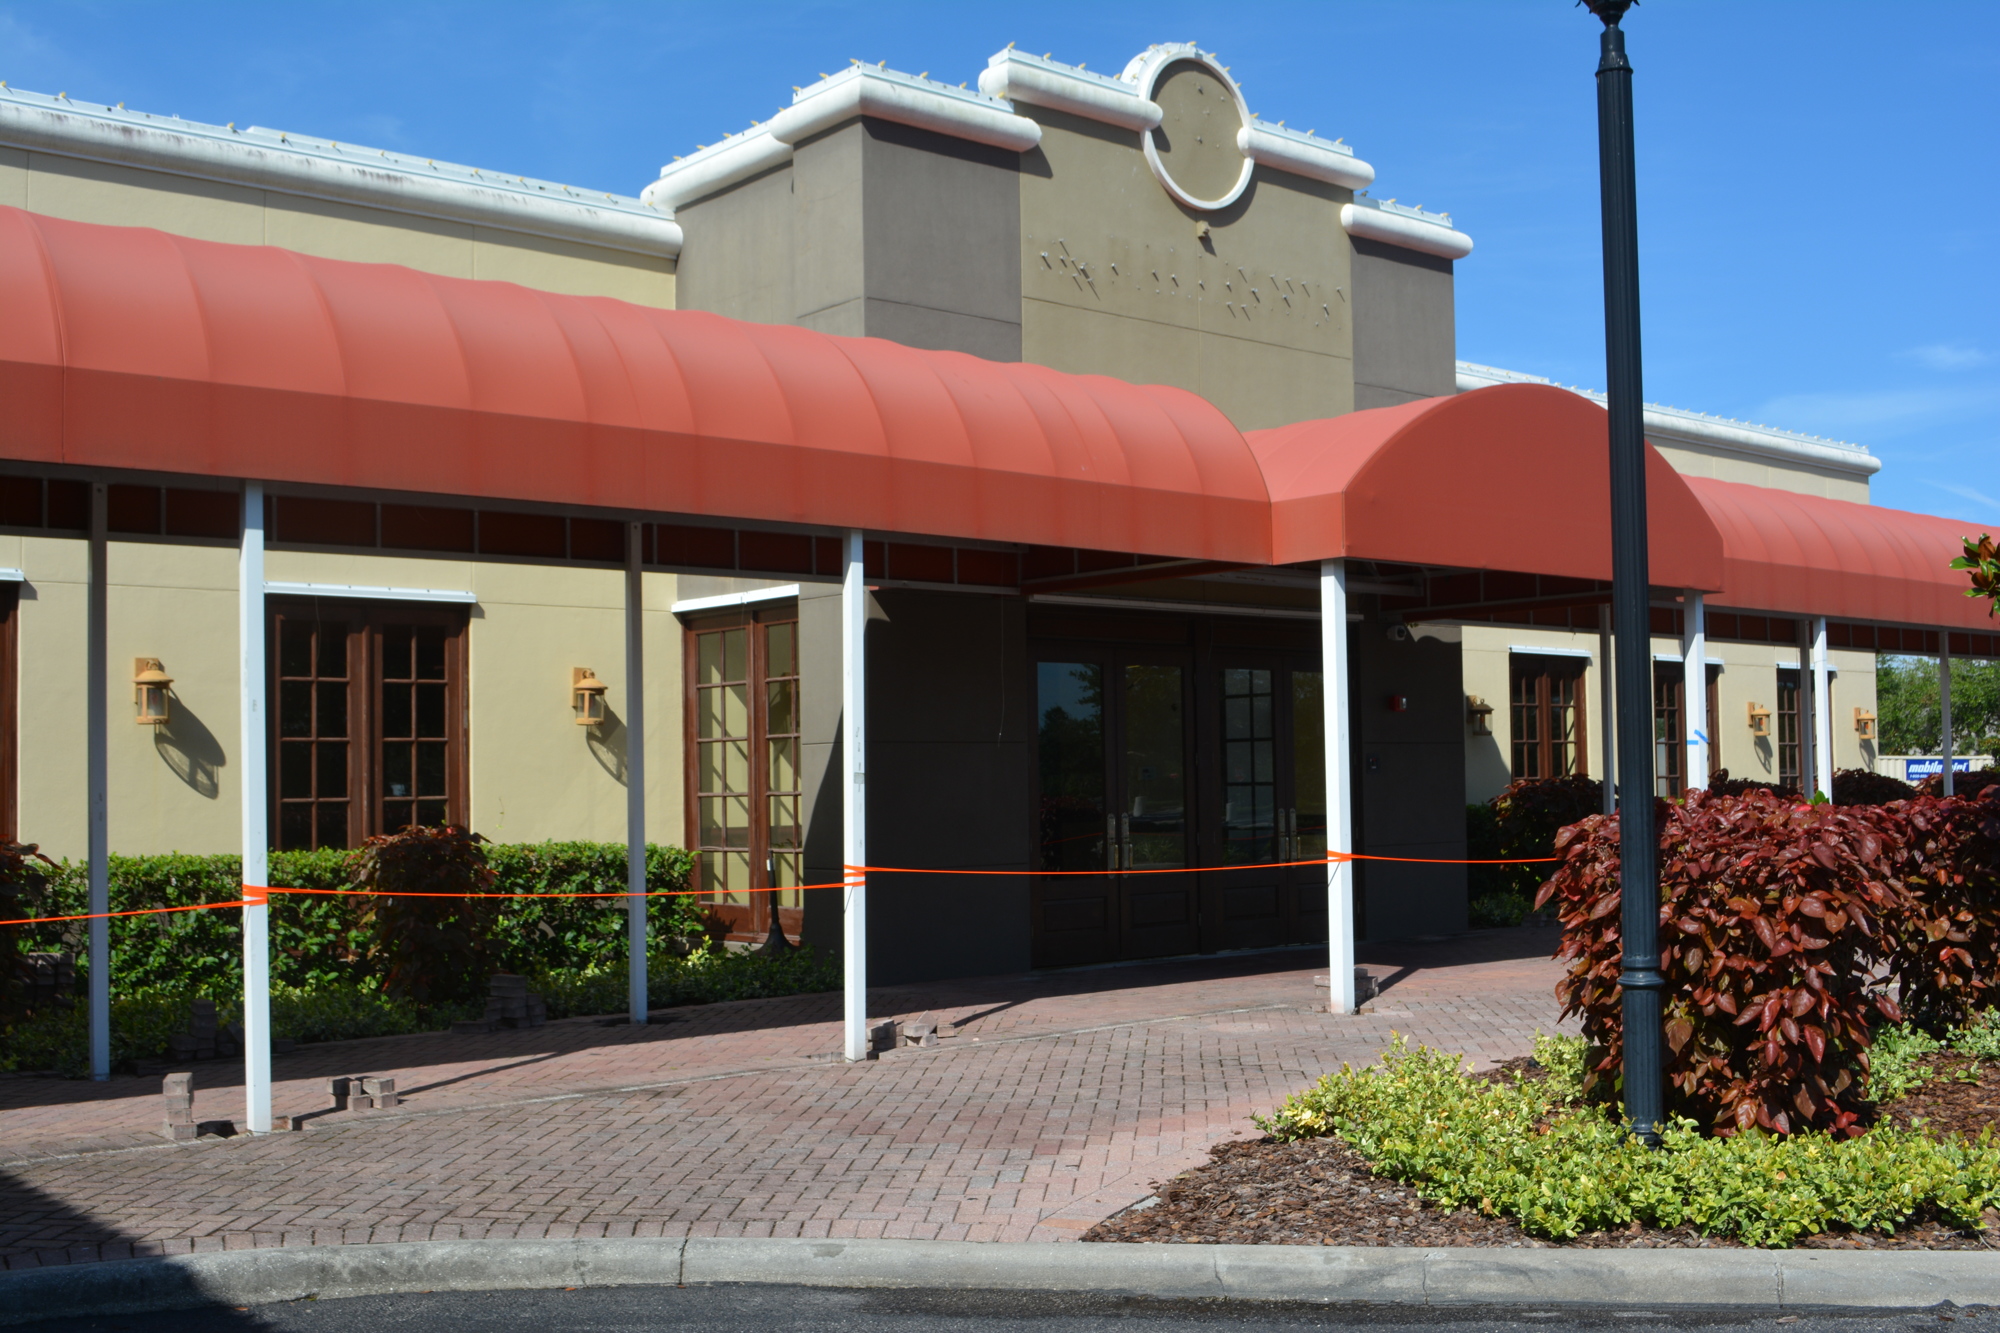 The former Polo Grill & Bar will be renovated to become the Grove under new owner Hugh Miller.